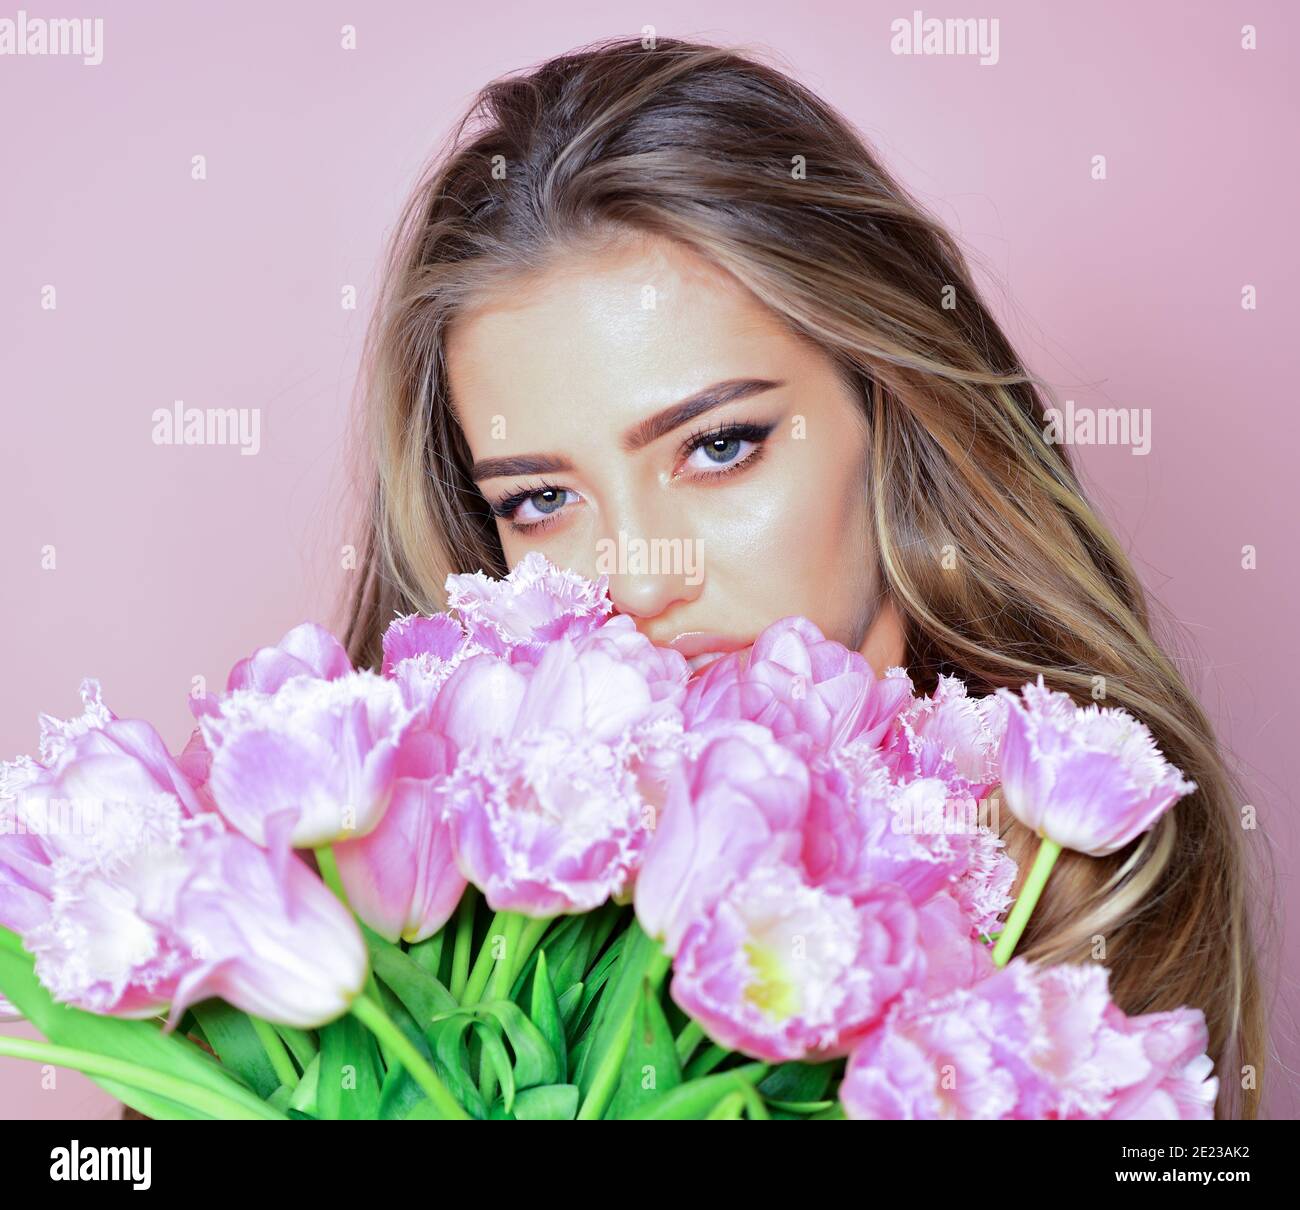 Spring girl with flowers. Portrait of a beautiful fashion woman. Face close-up Stock Photo